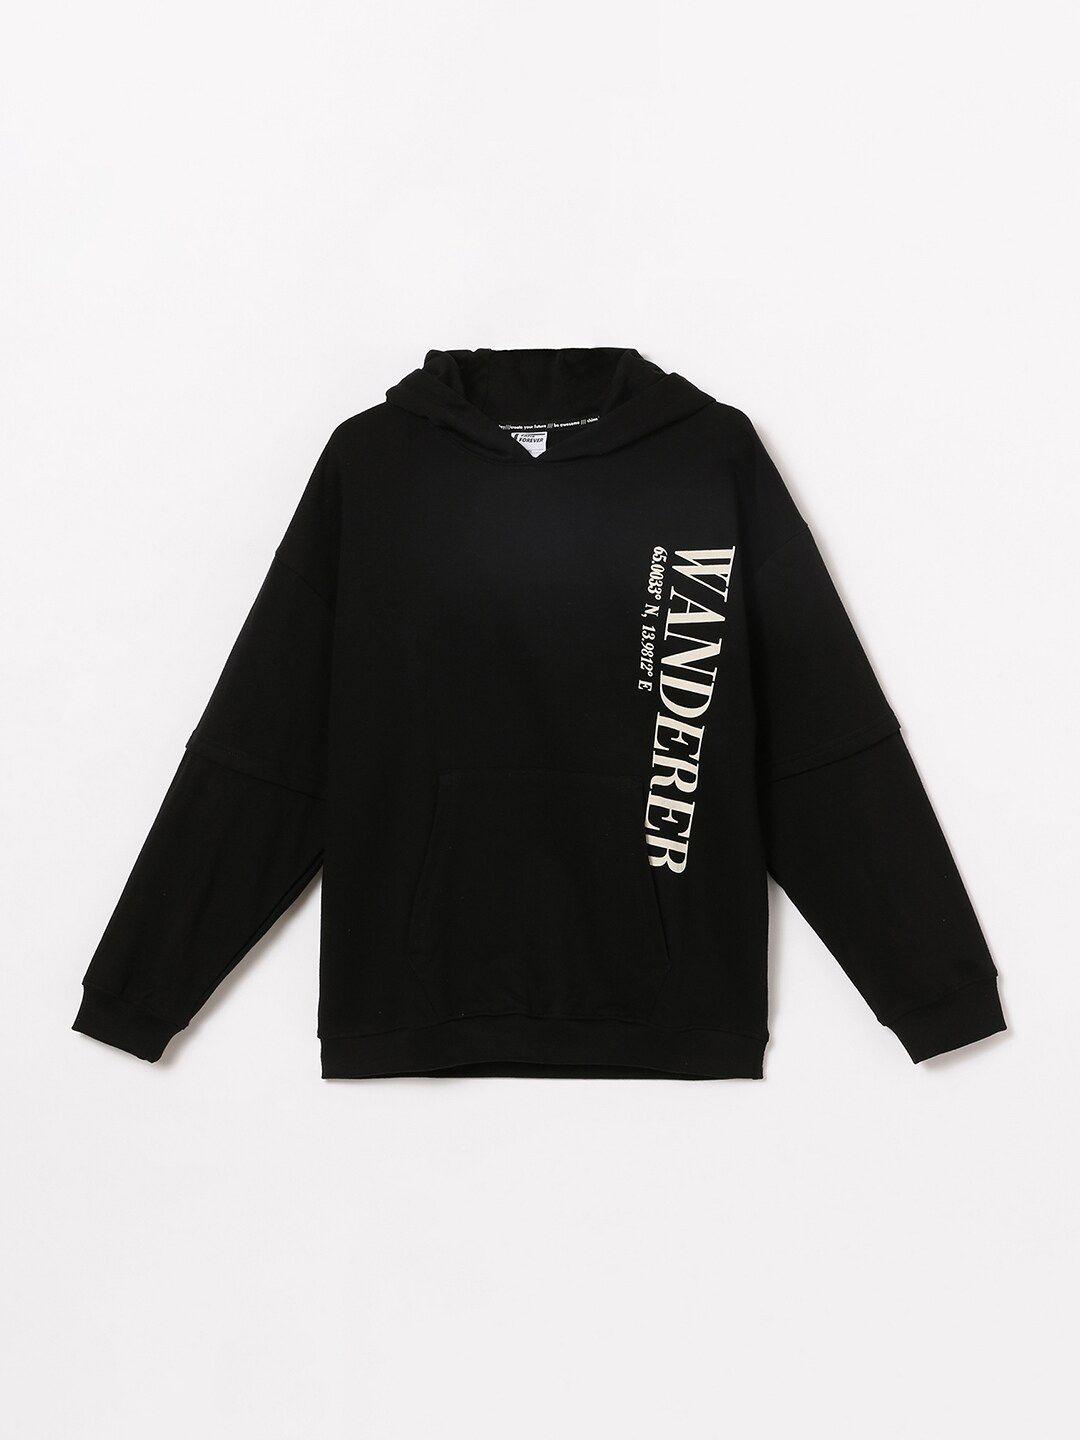 Fame Forever by Lifestyle Boys Printed Hooded Sweatshirt